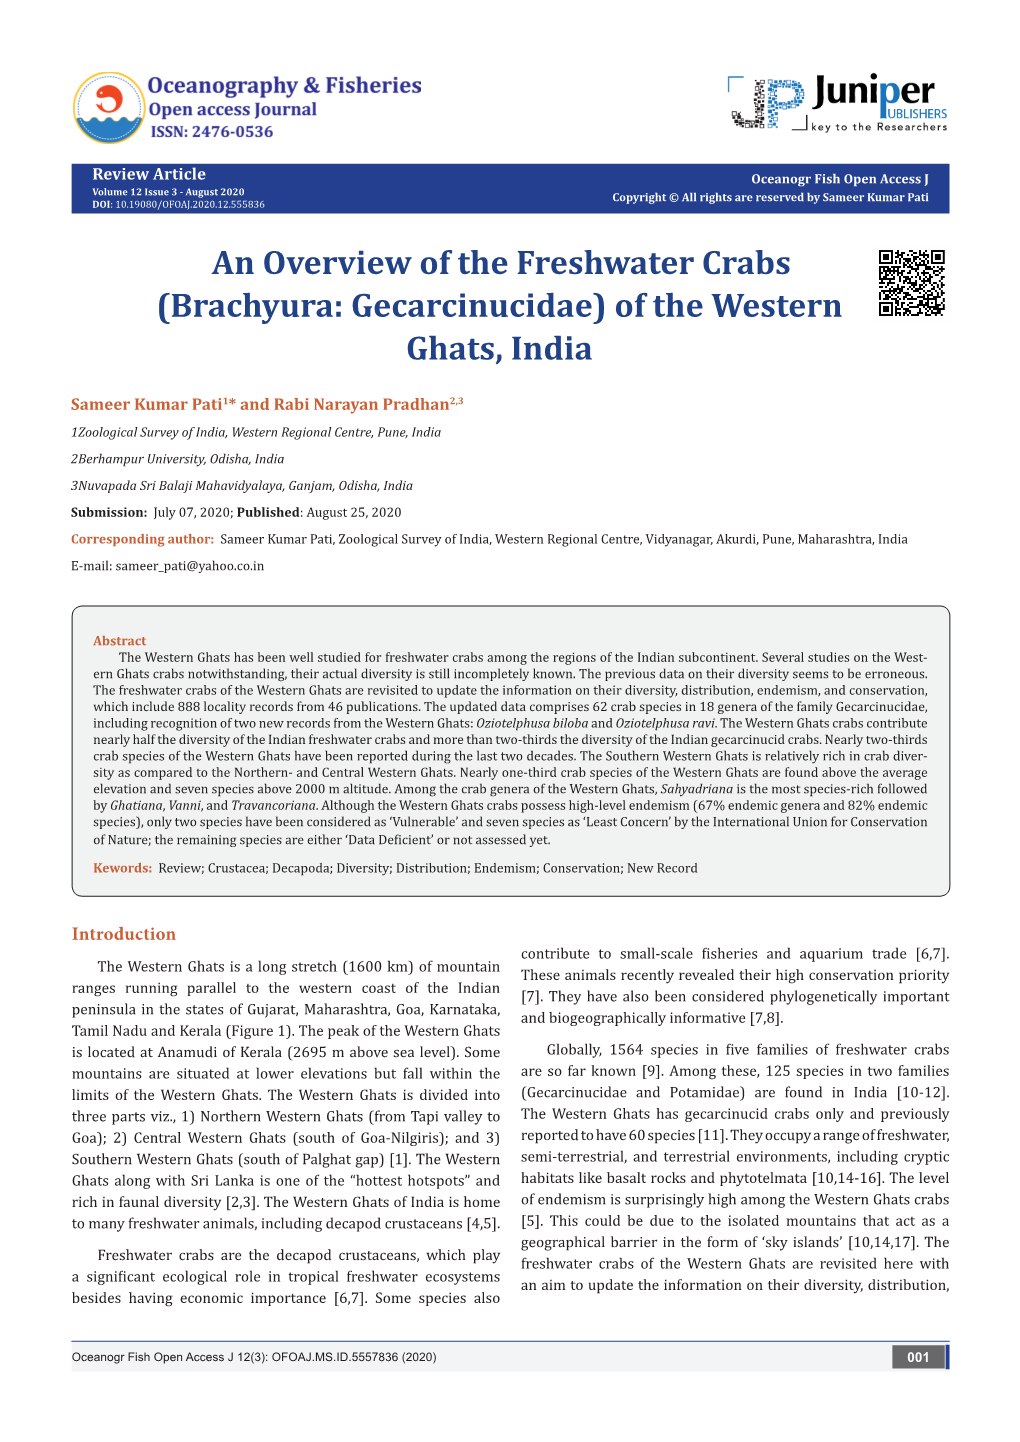 An Overview of the Freshwater Crabs (Brachyura: Gecarcinucidae) of the Western Ghats, India